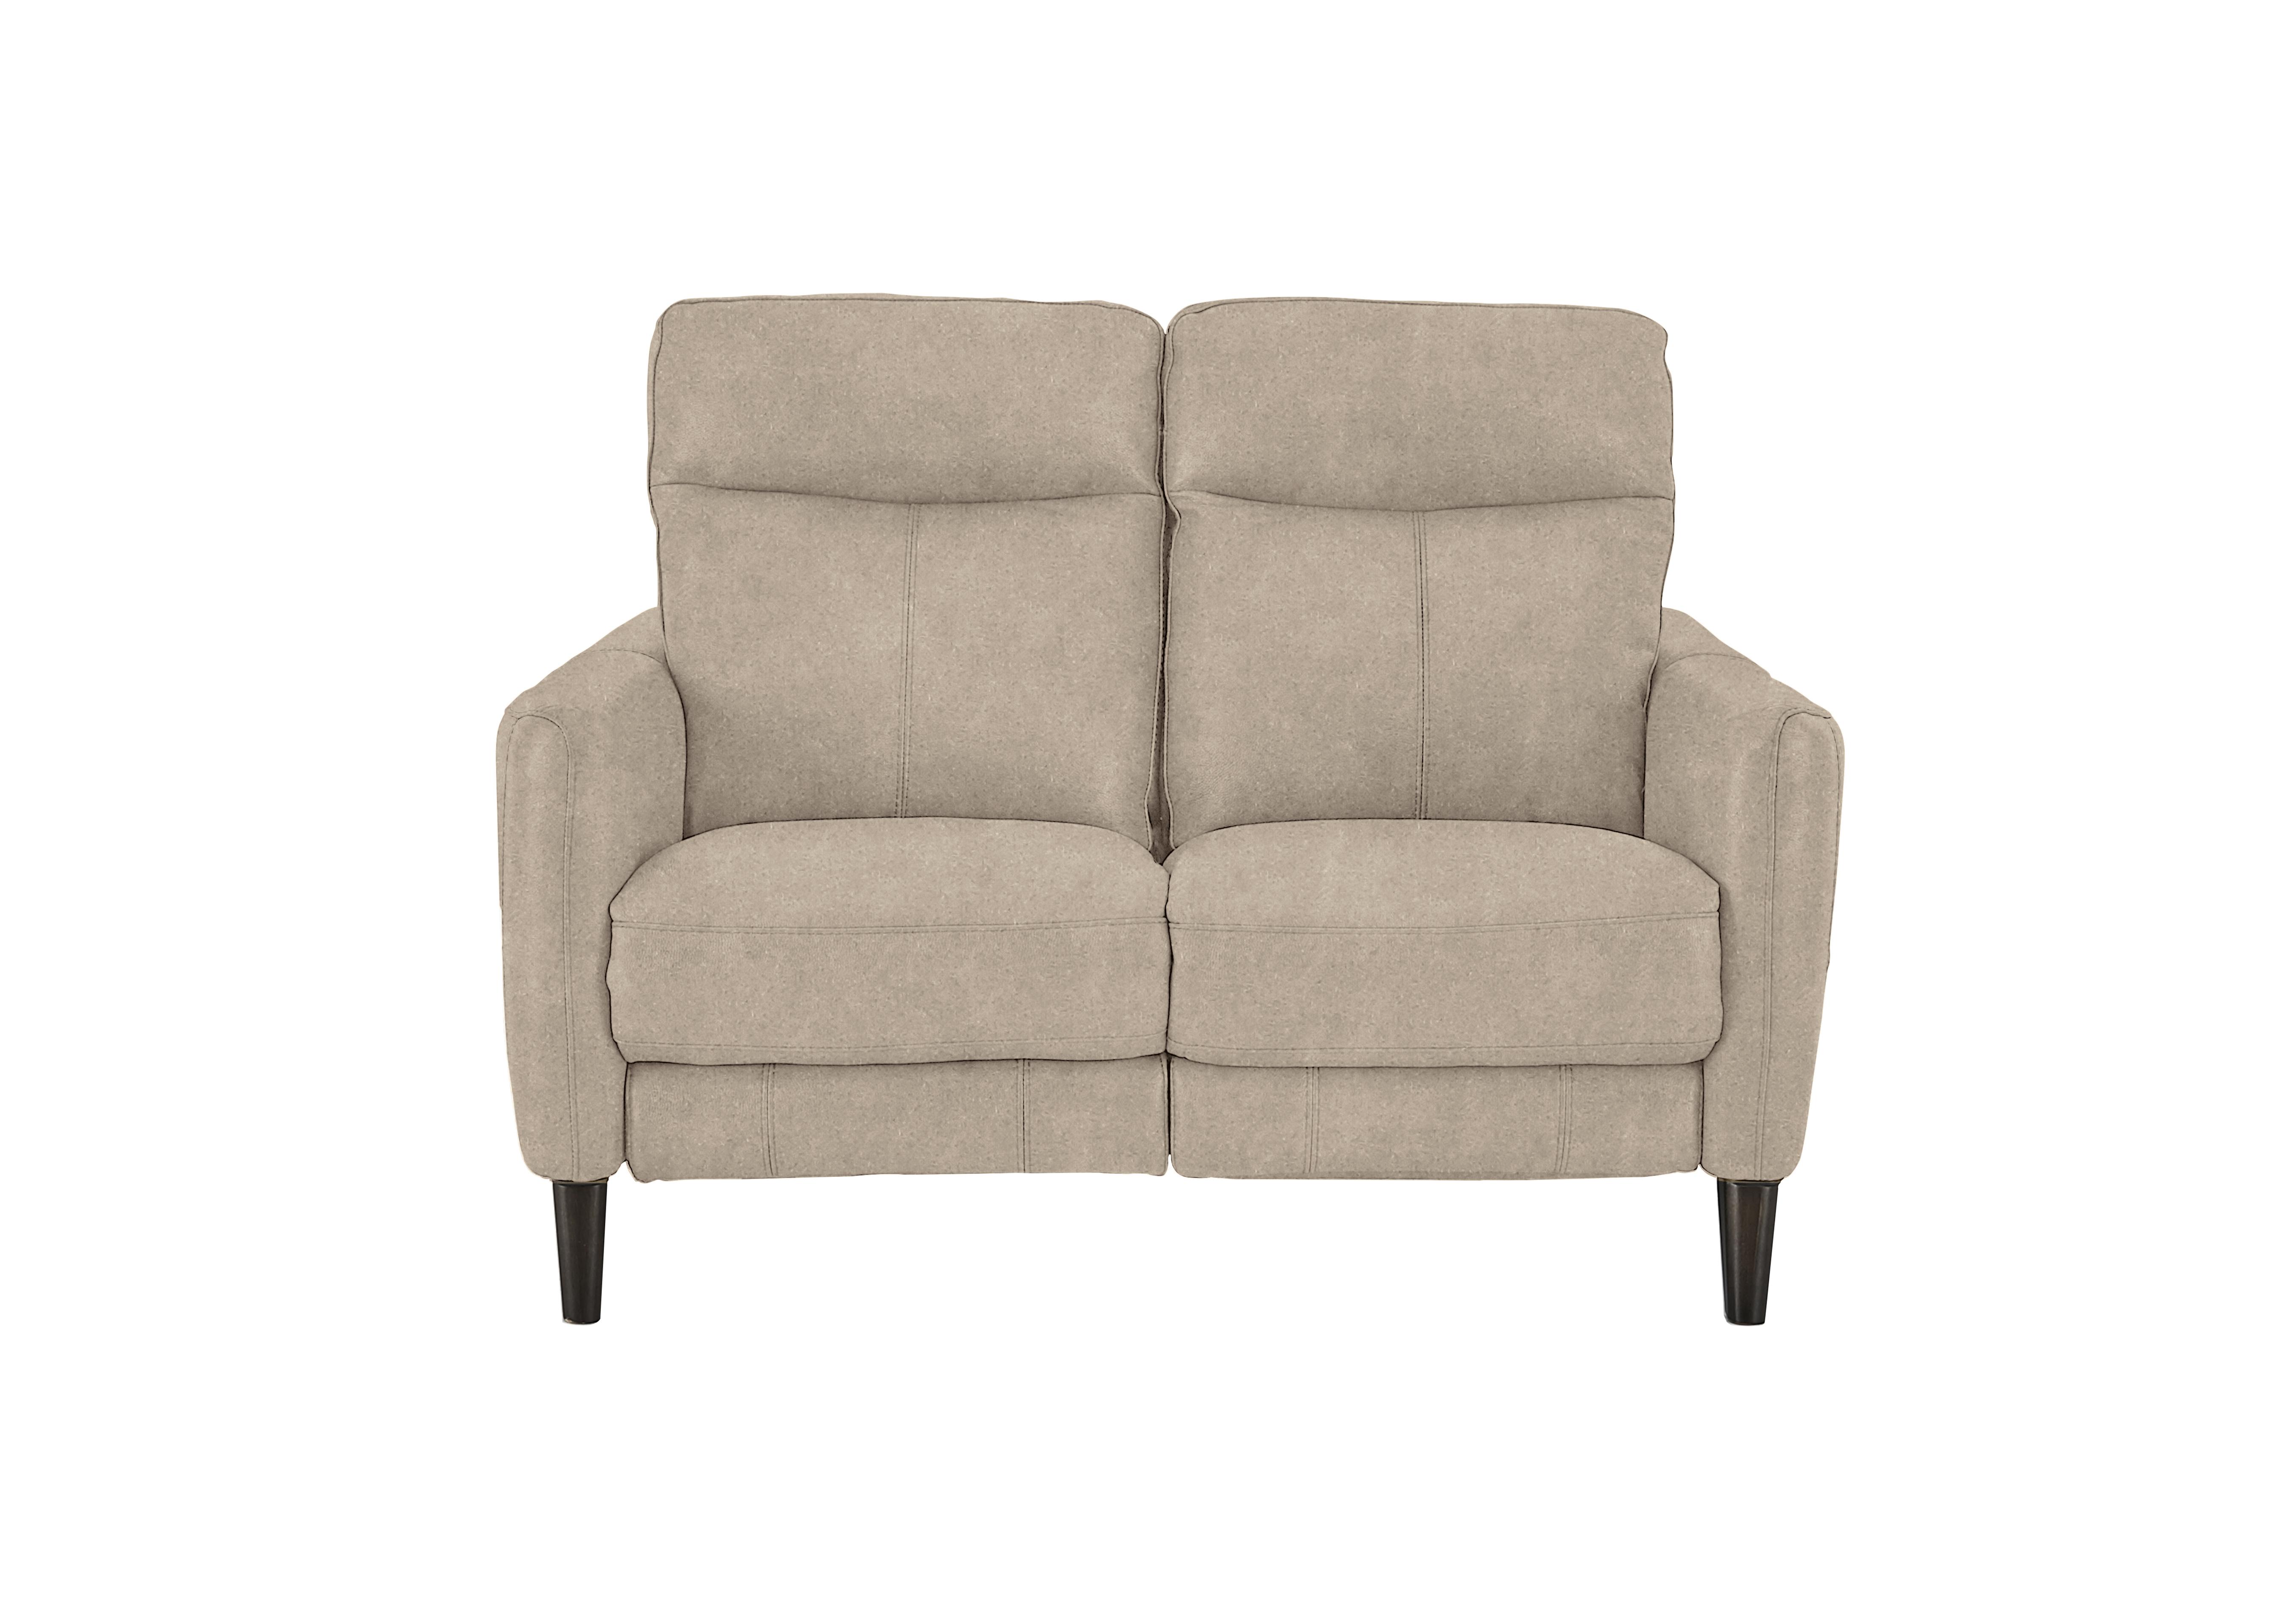 Compact Collection Petit 2 Seater Fabric Sofa in Bfa-Blj-R20 Bisque on Furniture Village